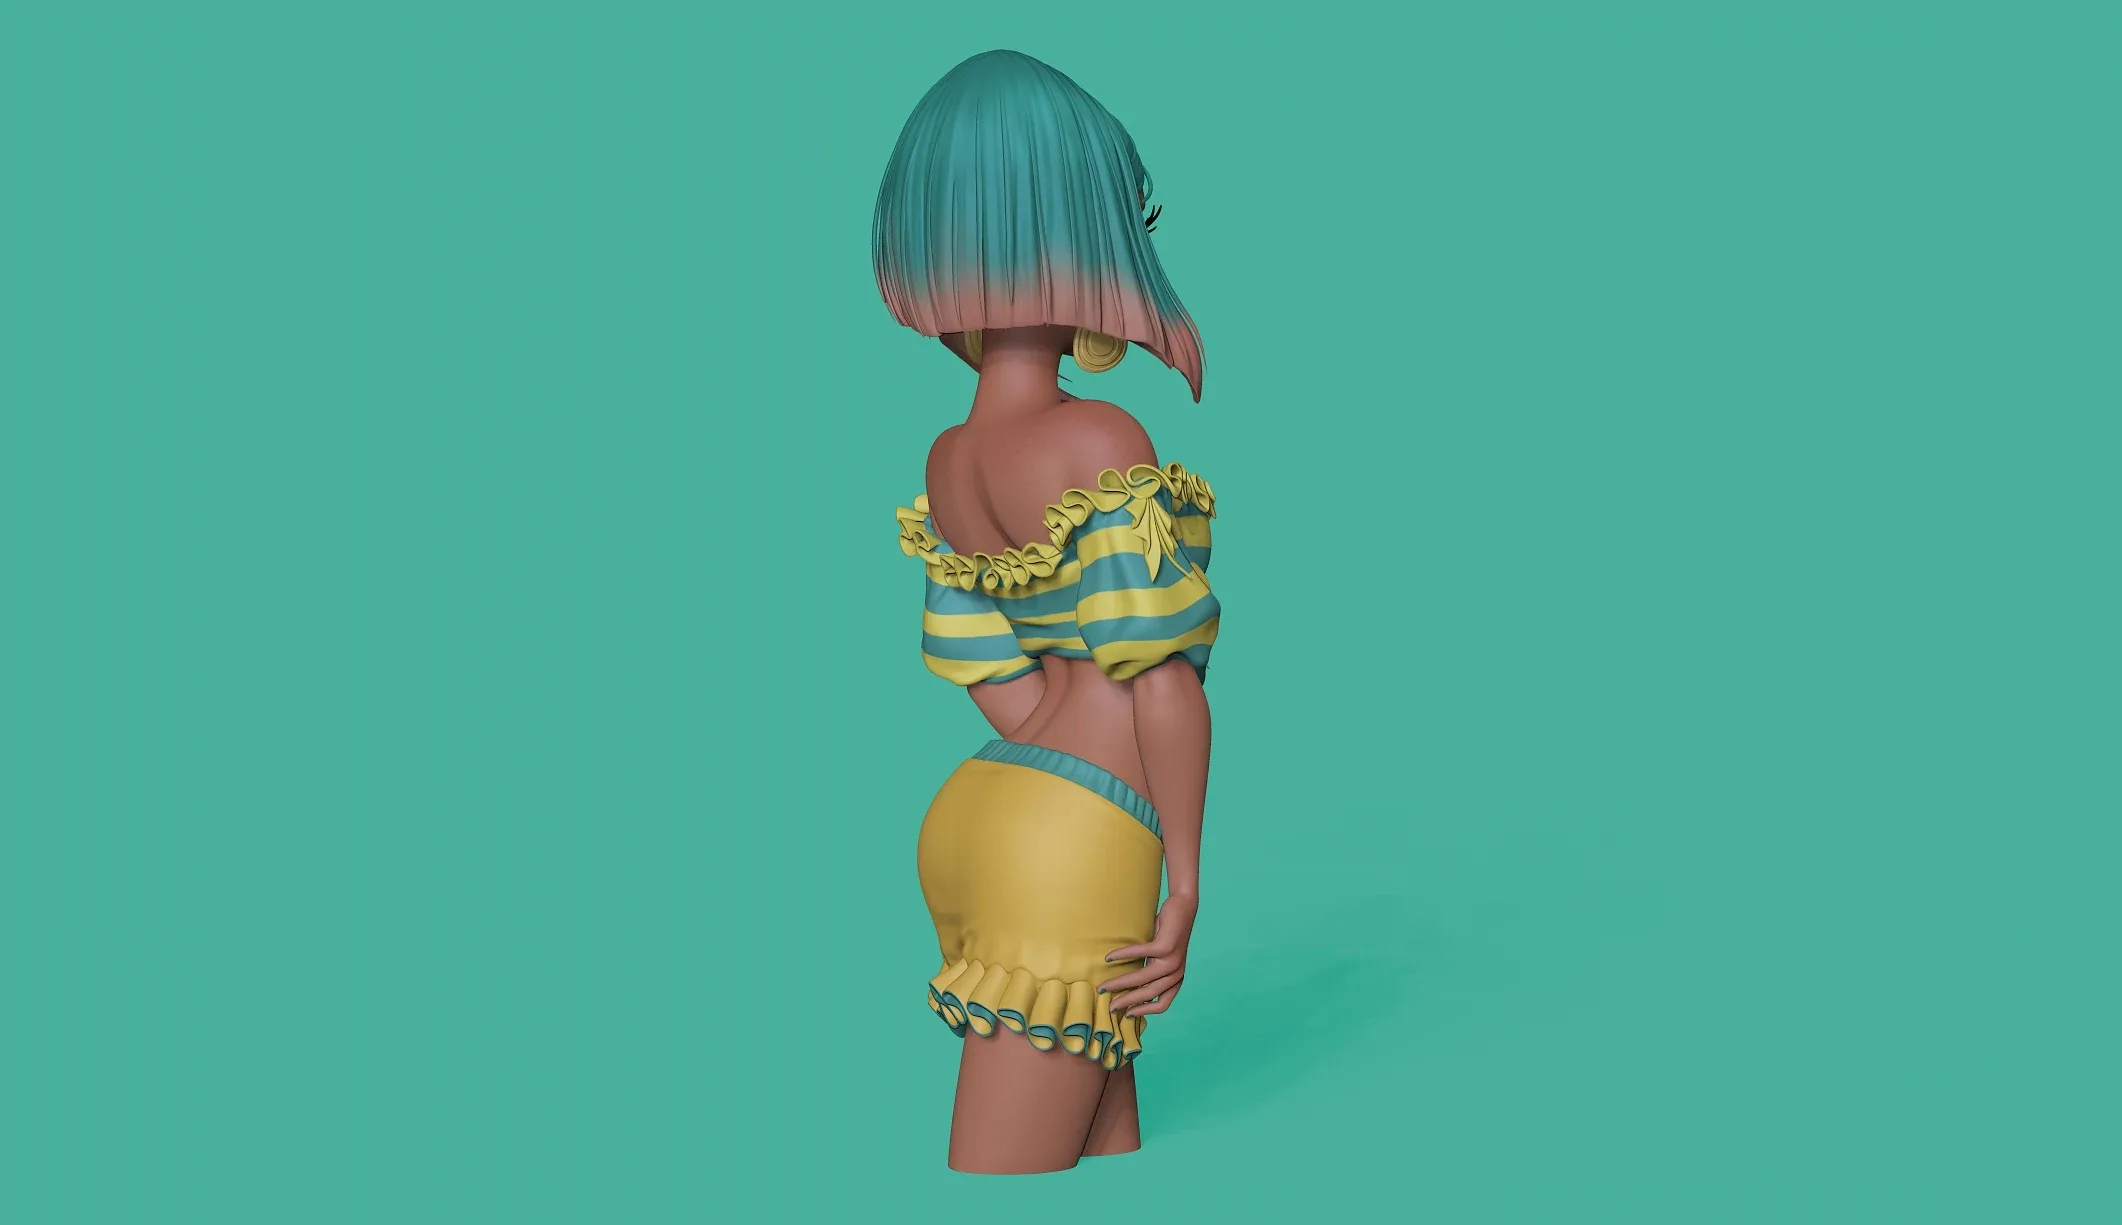 Teal & Yellow - ZBrush file